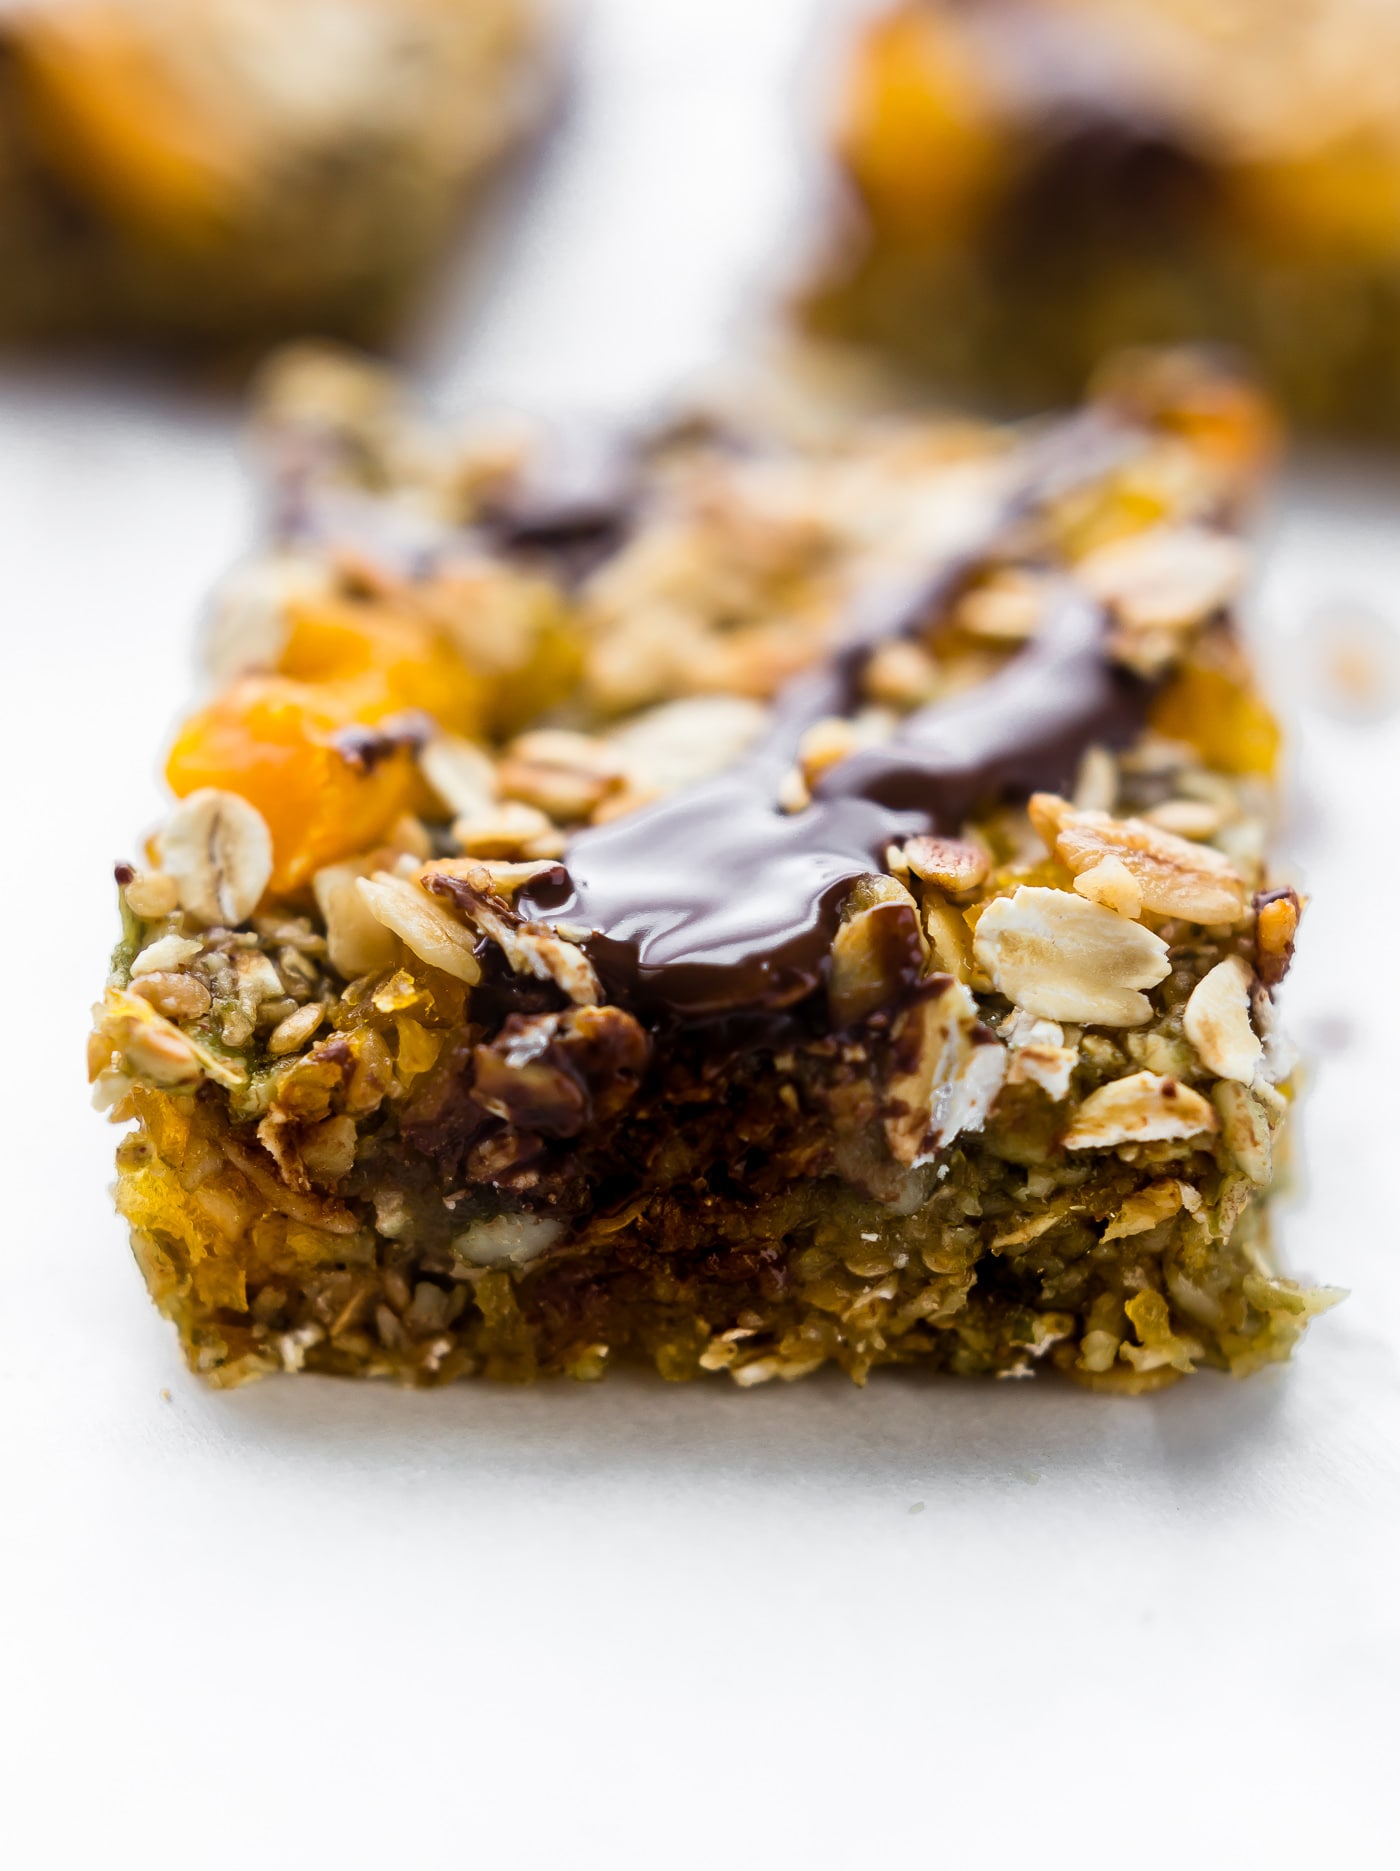 No Bake Apricot Oat Protein Bars easy to make, wholesome, and nut free! Made with dried apricots, gluten free oats, protein, & seeds! Sweet, chewy, vegan!